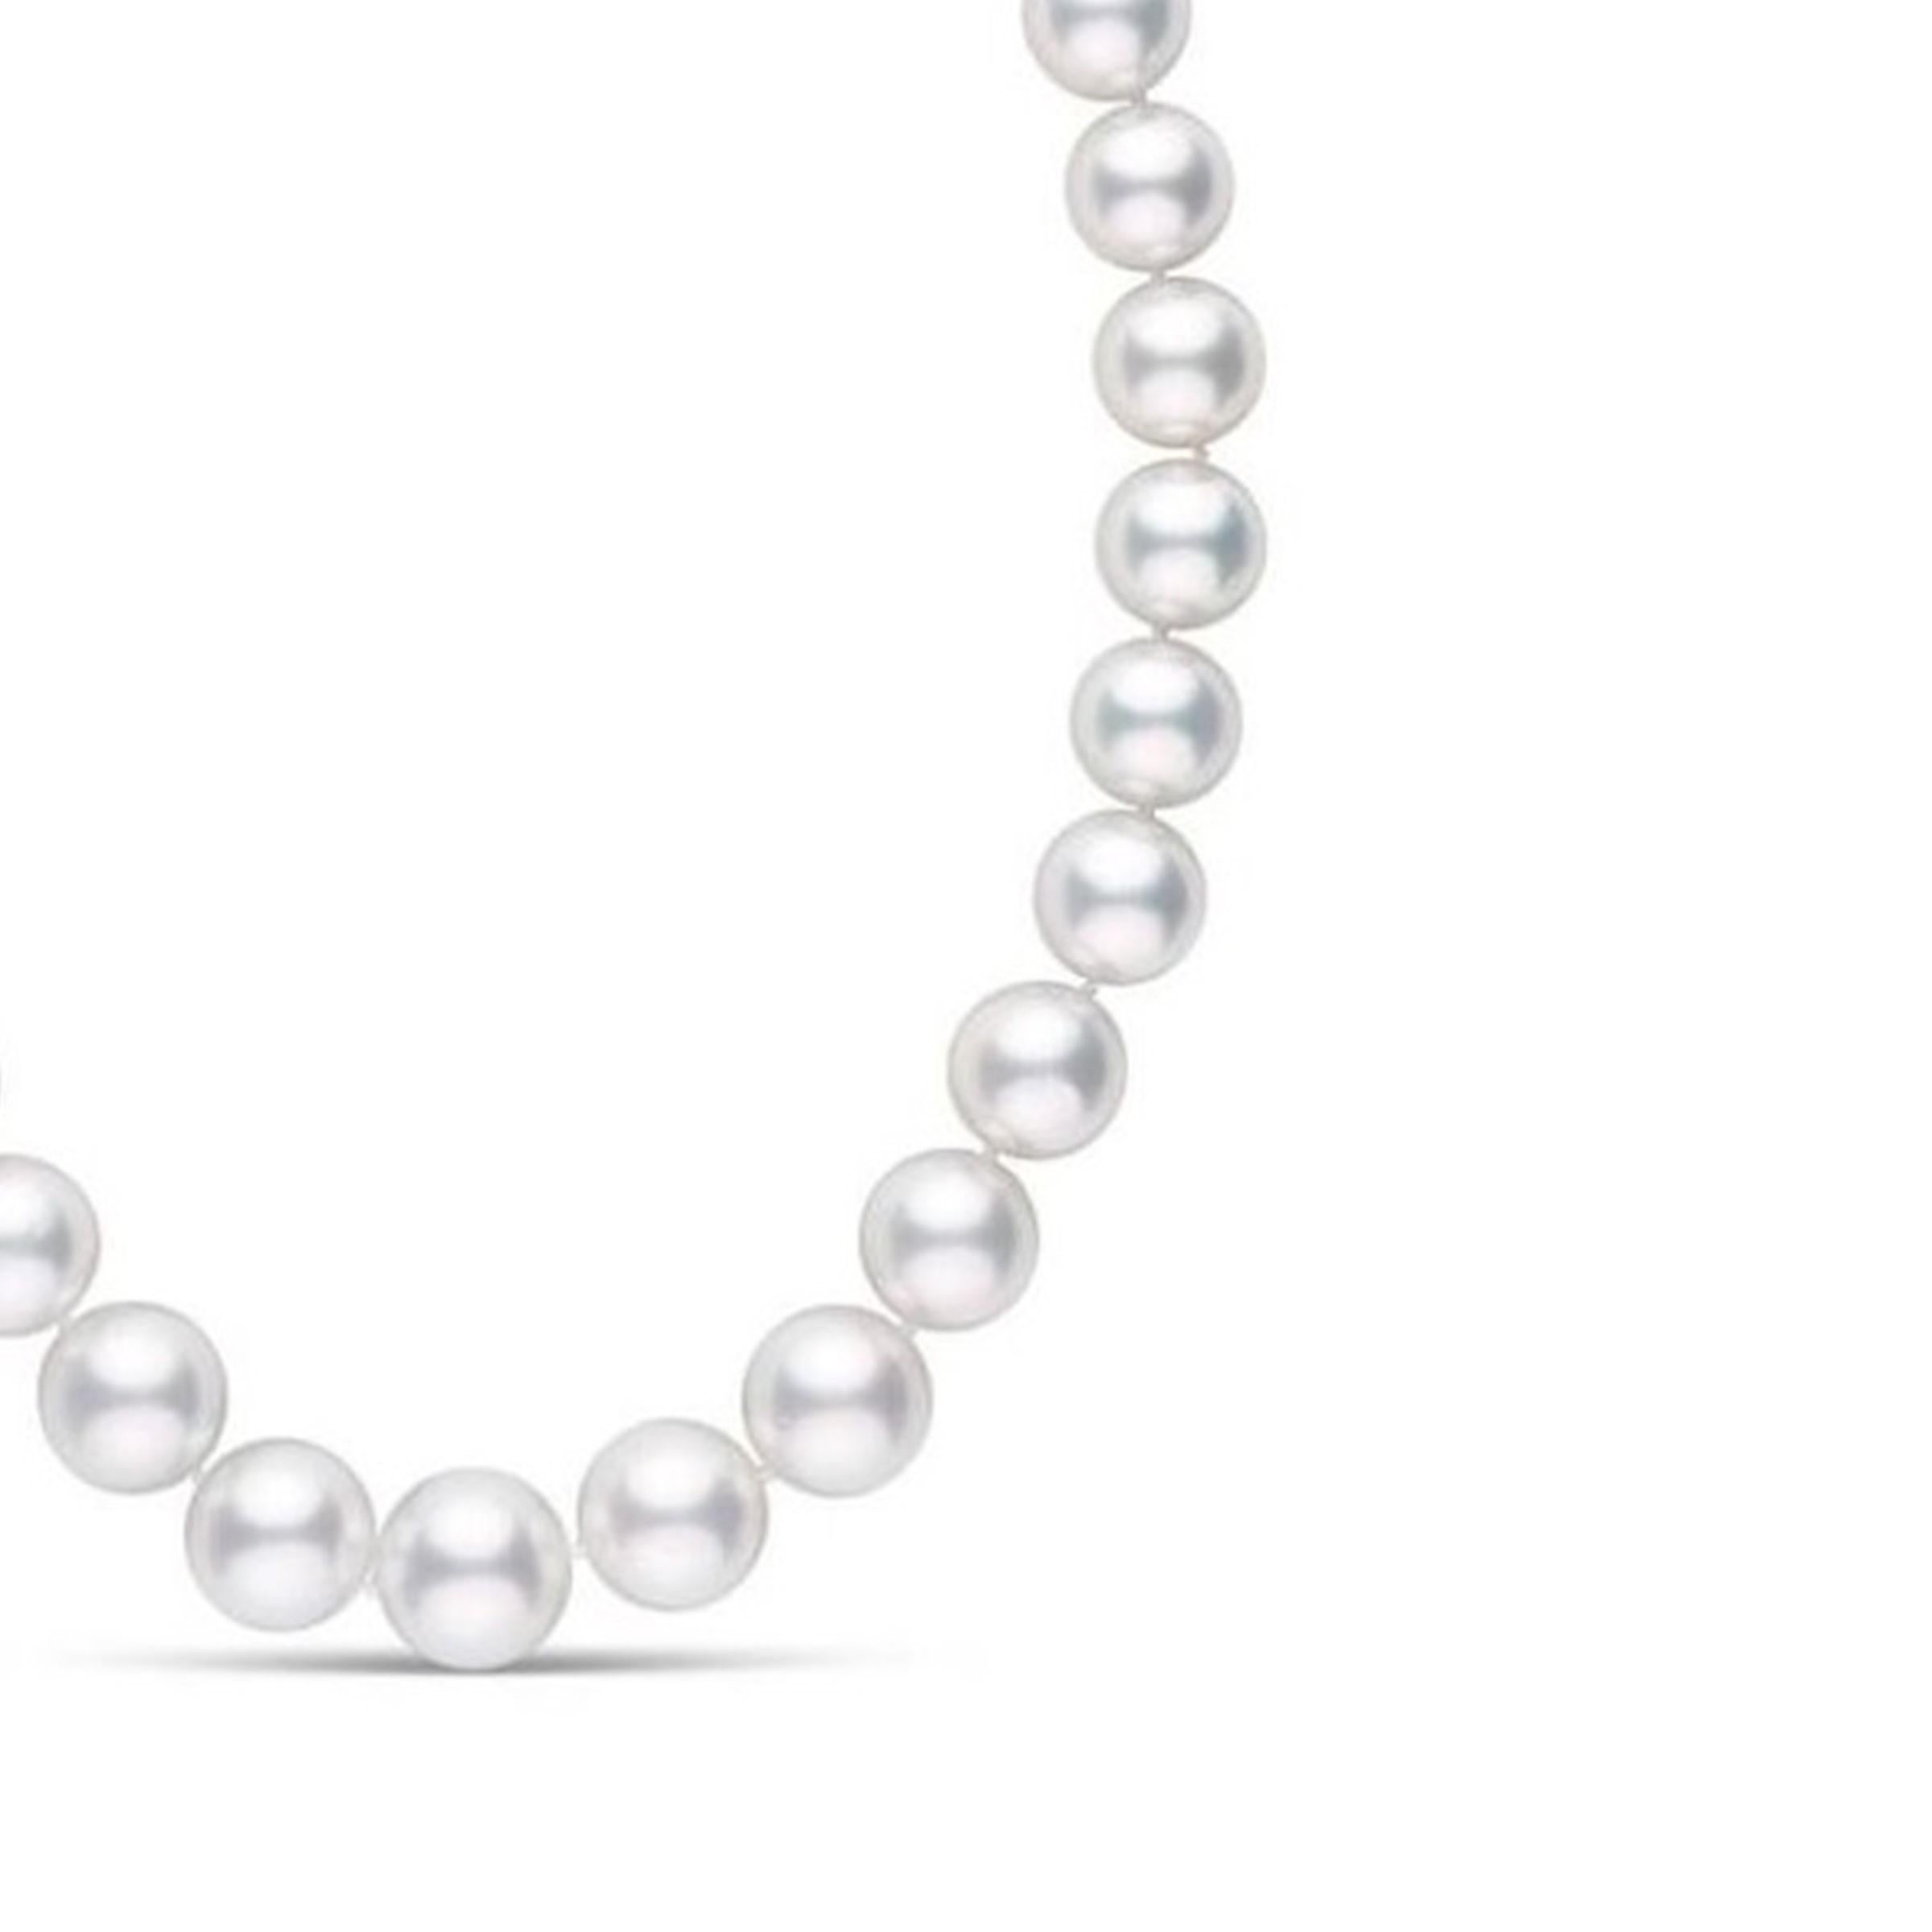 This exquisite South Sea pearl necklace features 11.0-13.0mm, AA+ quality pearls hand-picked for their radiant luster. 
This princess length necklace comes packaged in a beautiful jewelry gift box. Just perfect for your next momentous